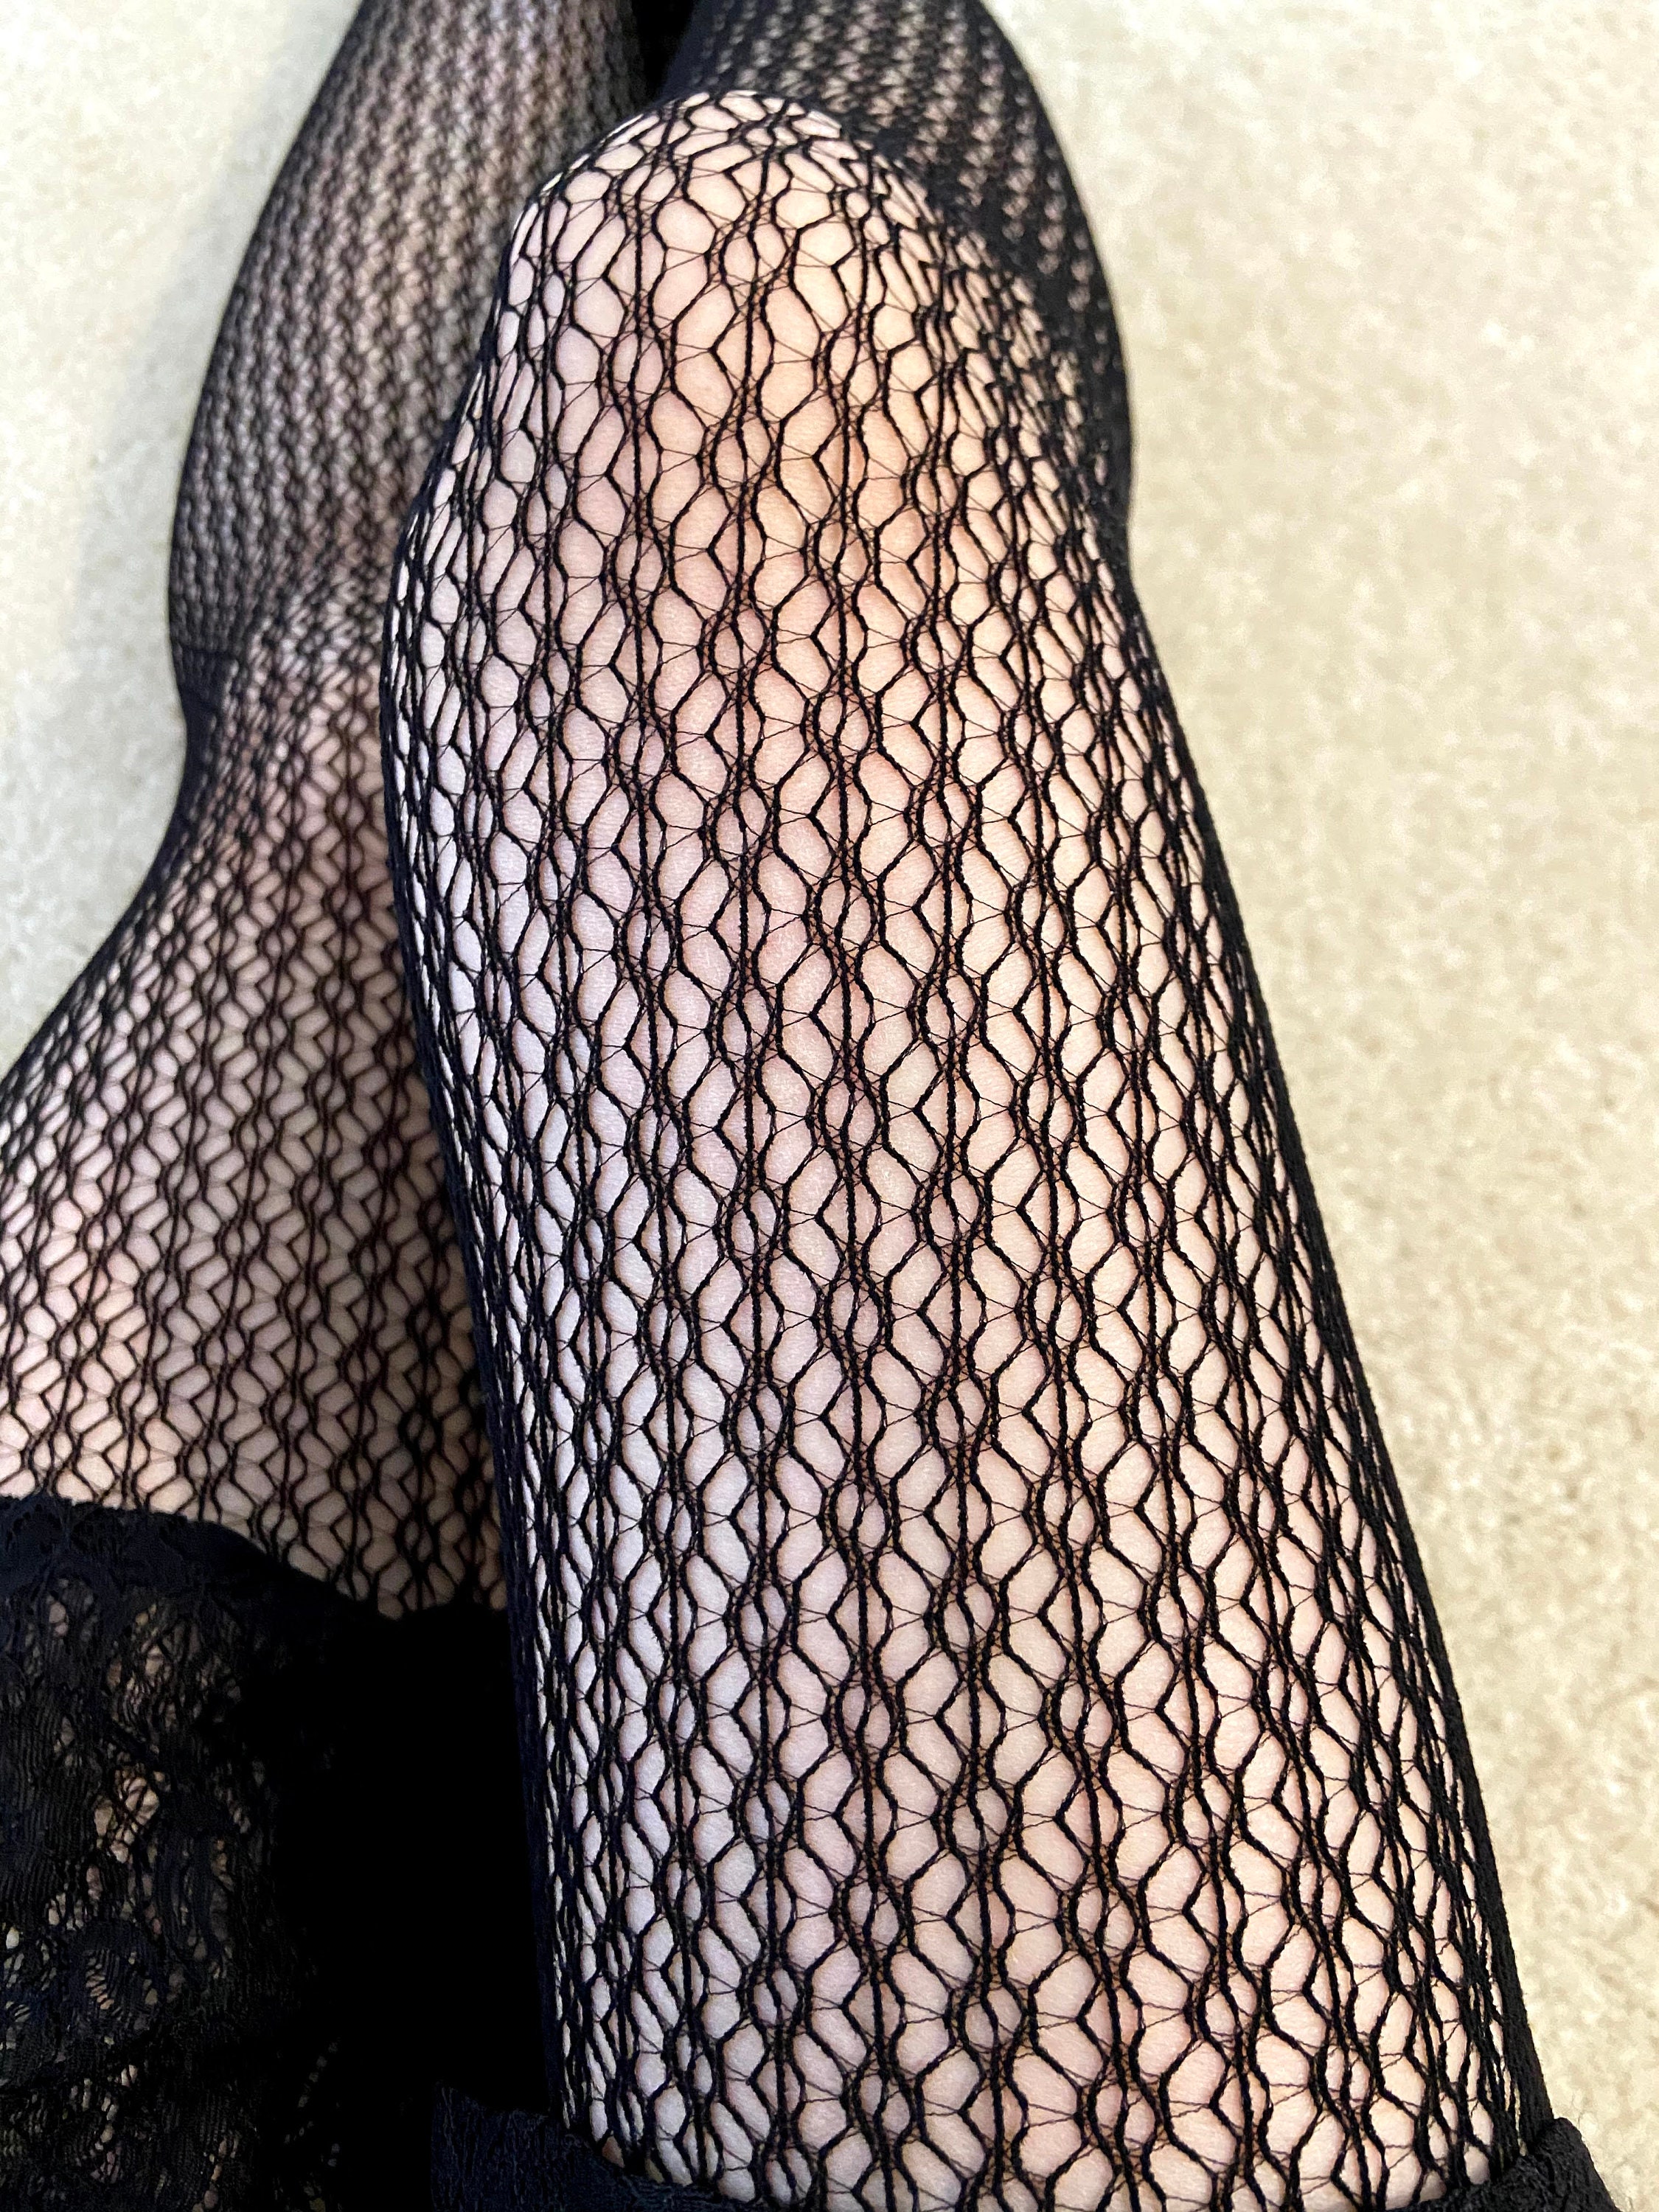 Tights for Women Fishnet Mesh Sexy Black Tights Pantyhose Stocking